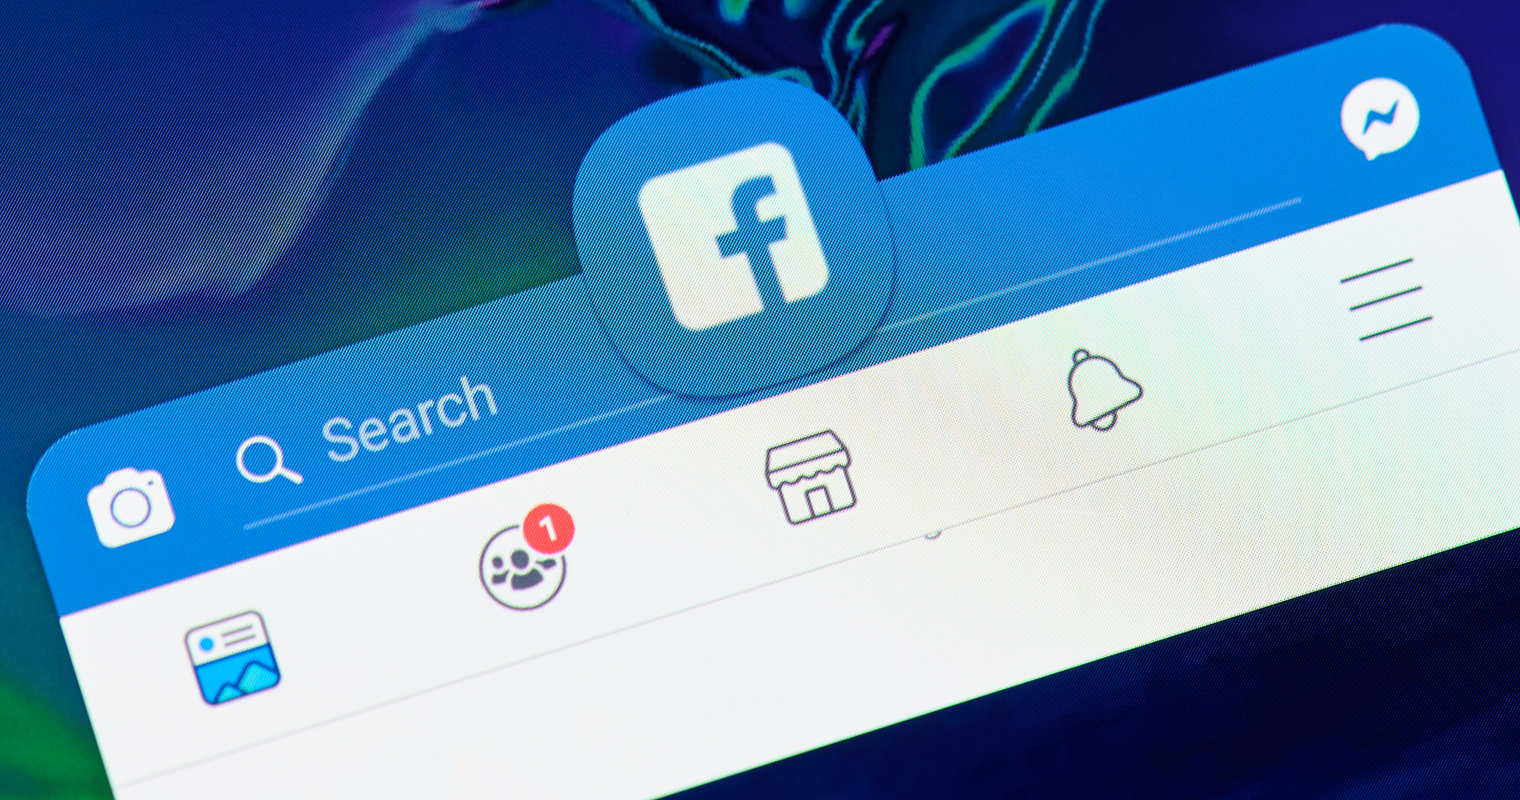 Facebook Tests Integrating Stories into the News Feed